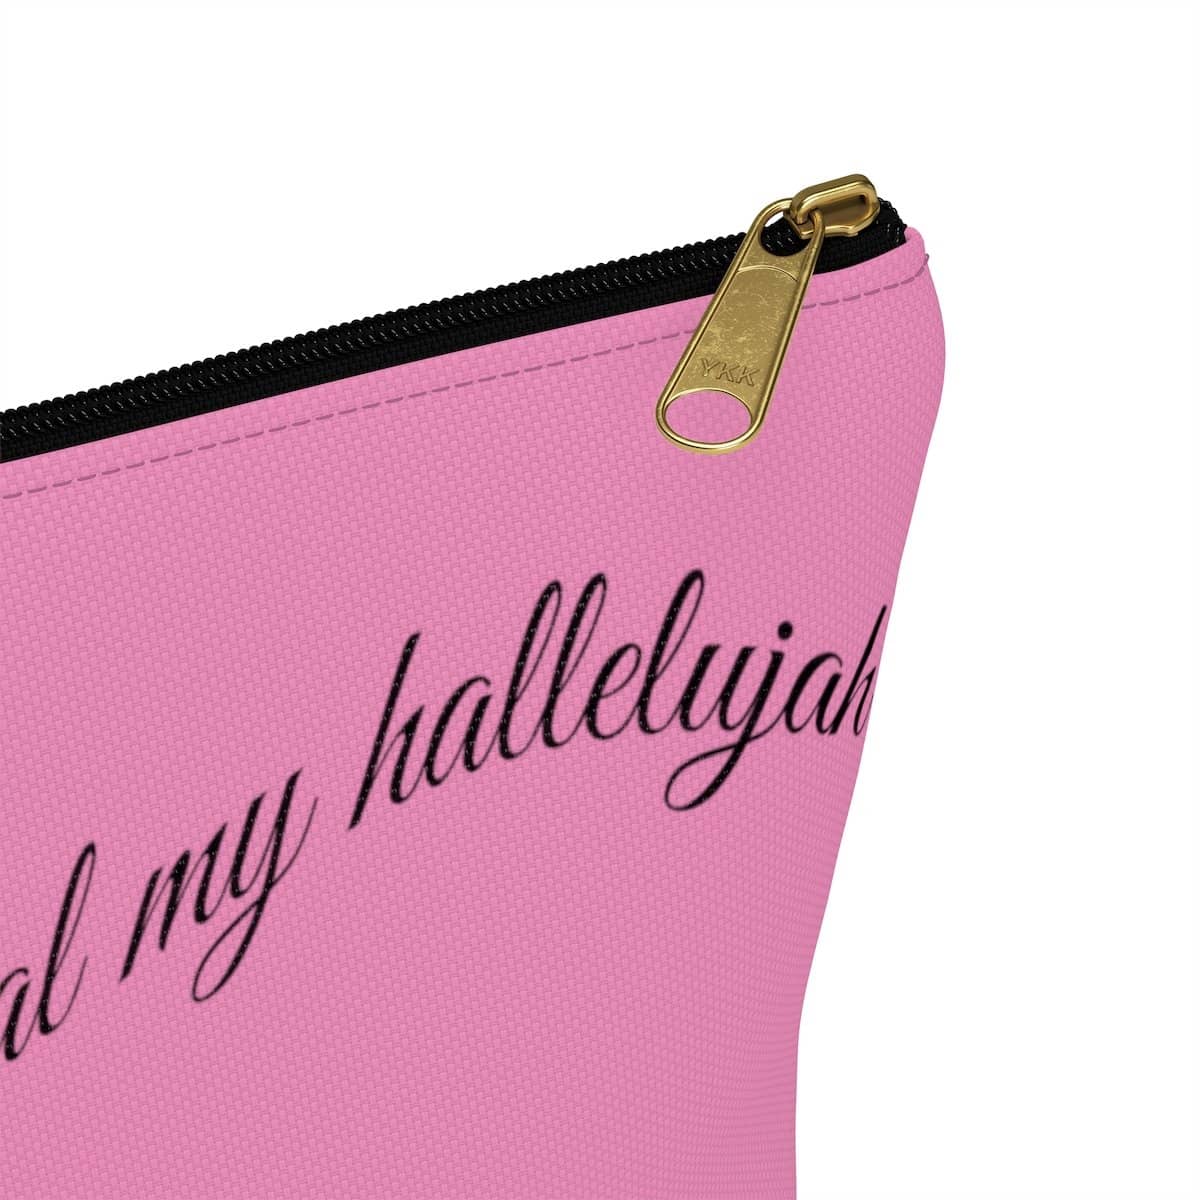 Accessory Pouch w T-bottom &quot;No One Can Steal My Hallelujah&quot; in 2 Sizes (3958407495774)